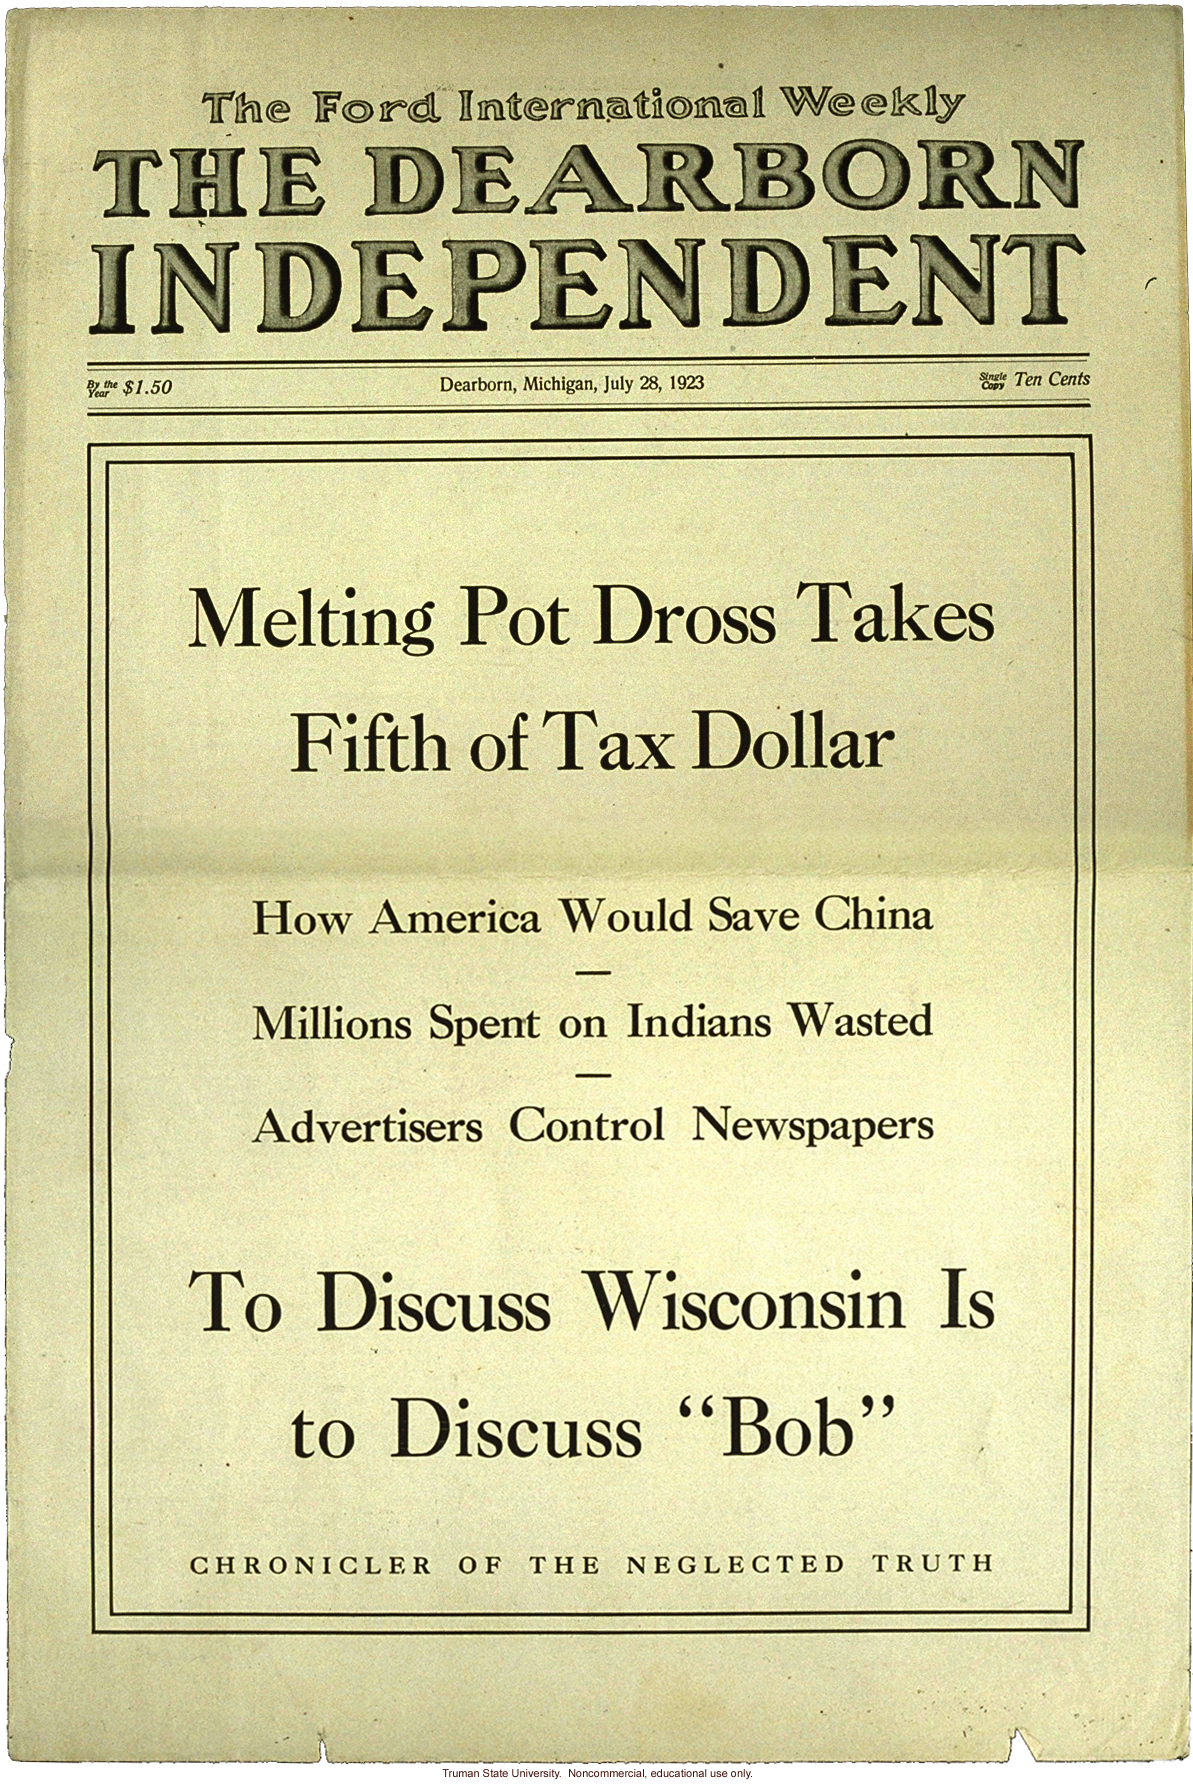 &quote;Melting Pot Dross Takes Fifth of Tax Dollar,&quote; The Dearborn Independent (7/28/1923)